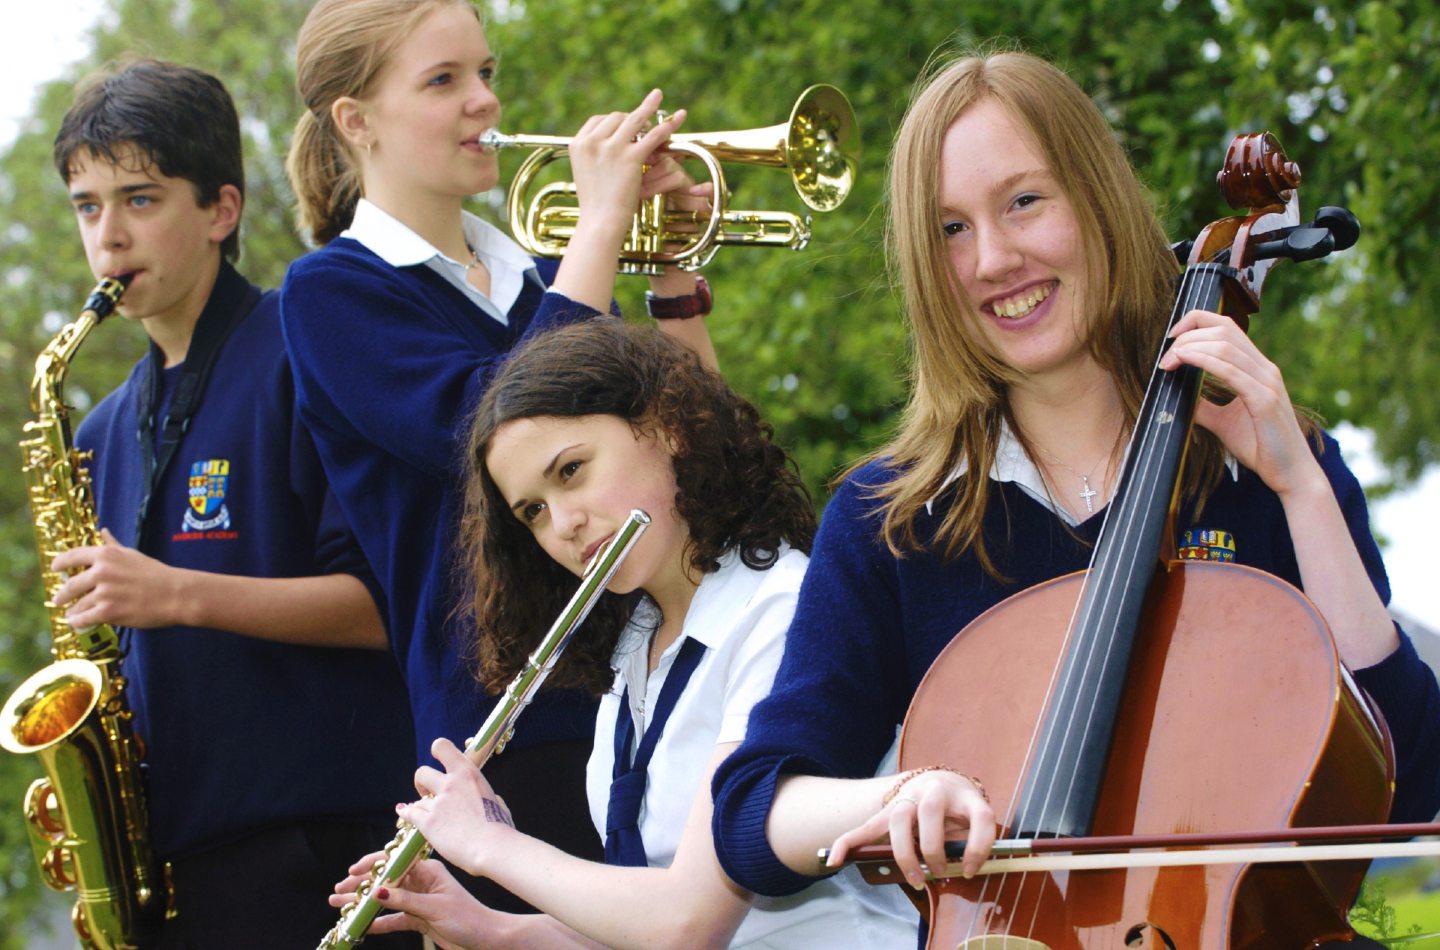 Inverurie Academy posing for photos with musical instruments